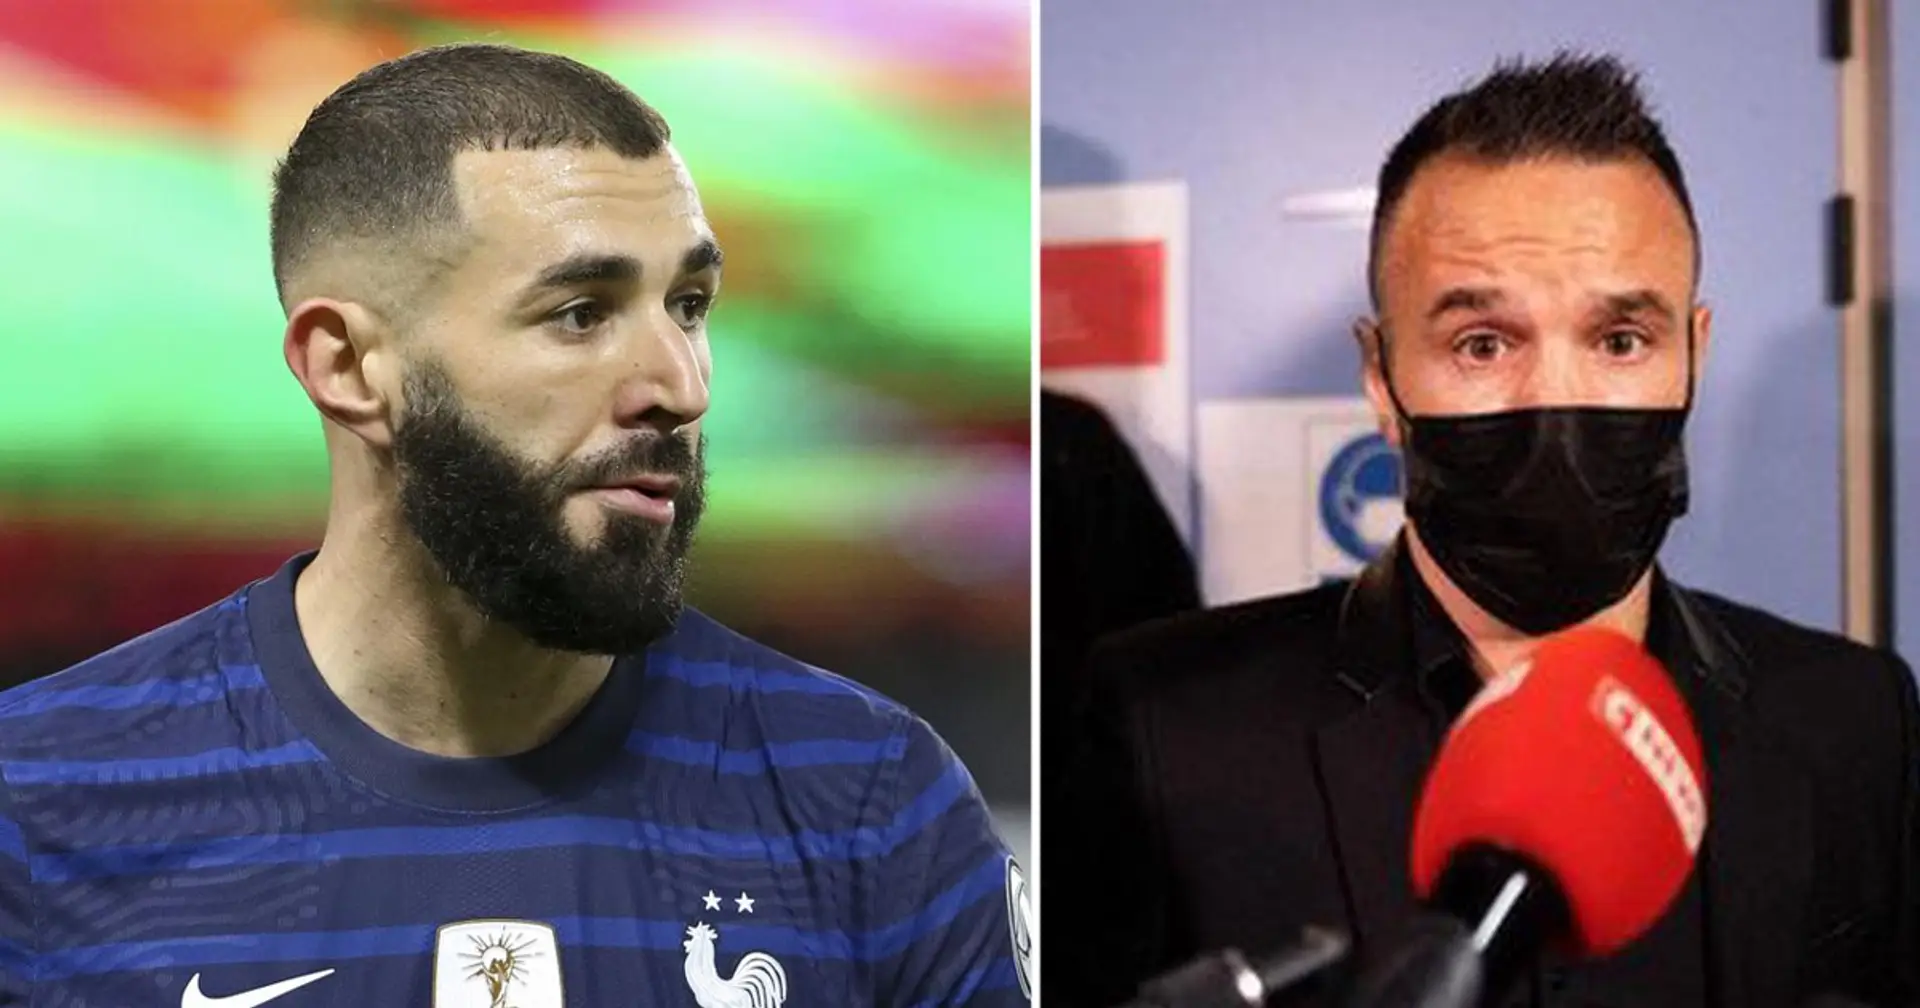 Karim Benzema found guilty of complicity in blackmail attempt, handed 1-year suspended sentence